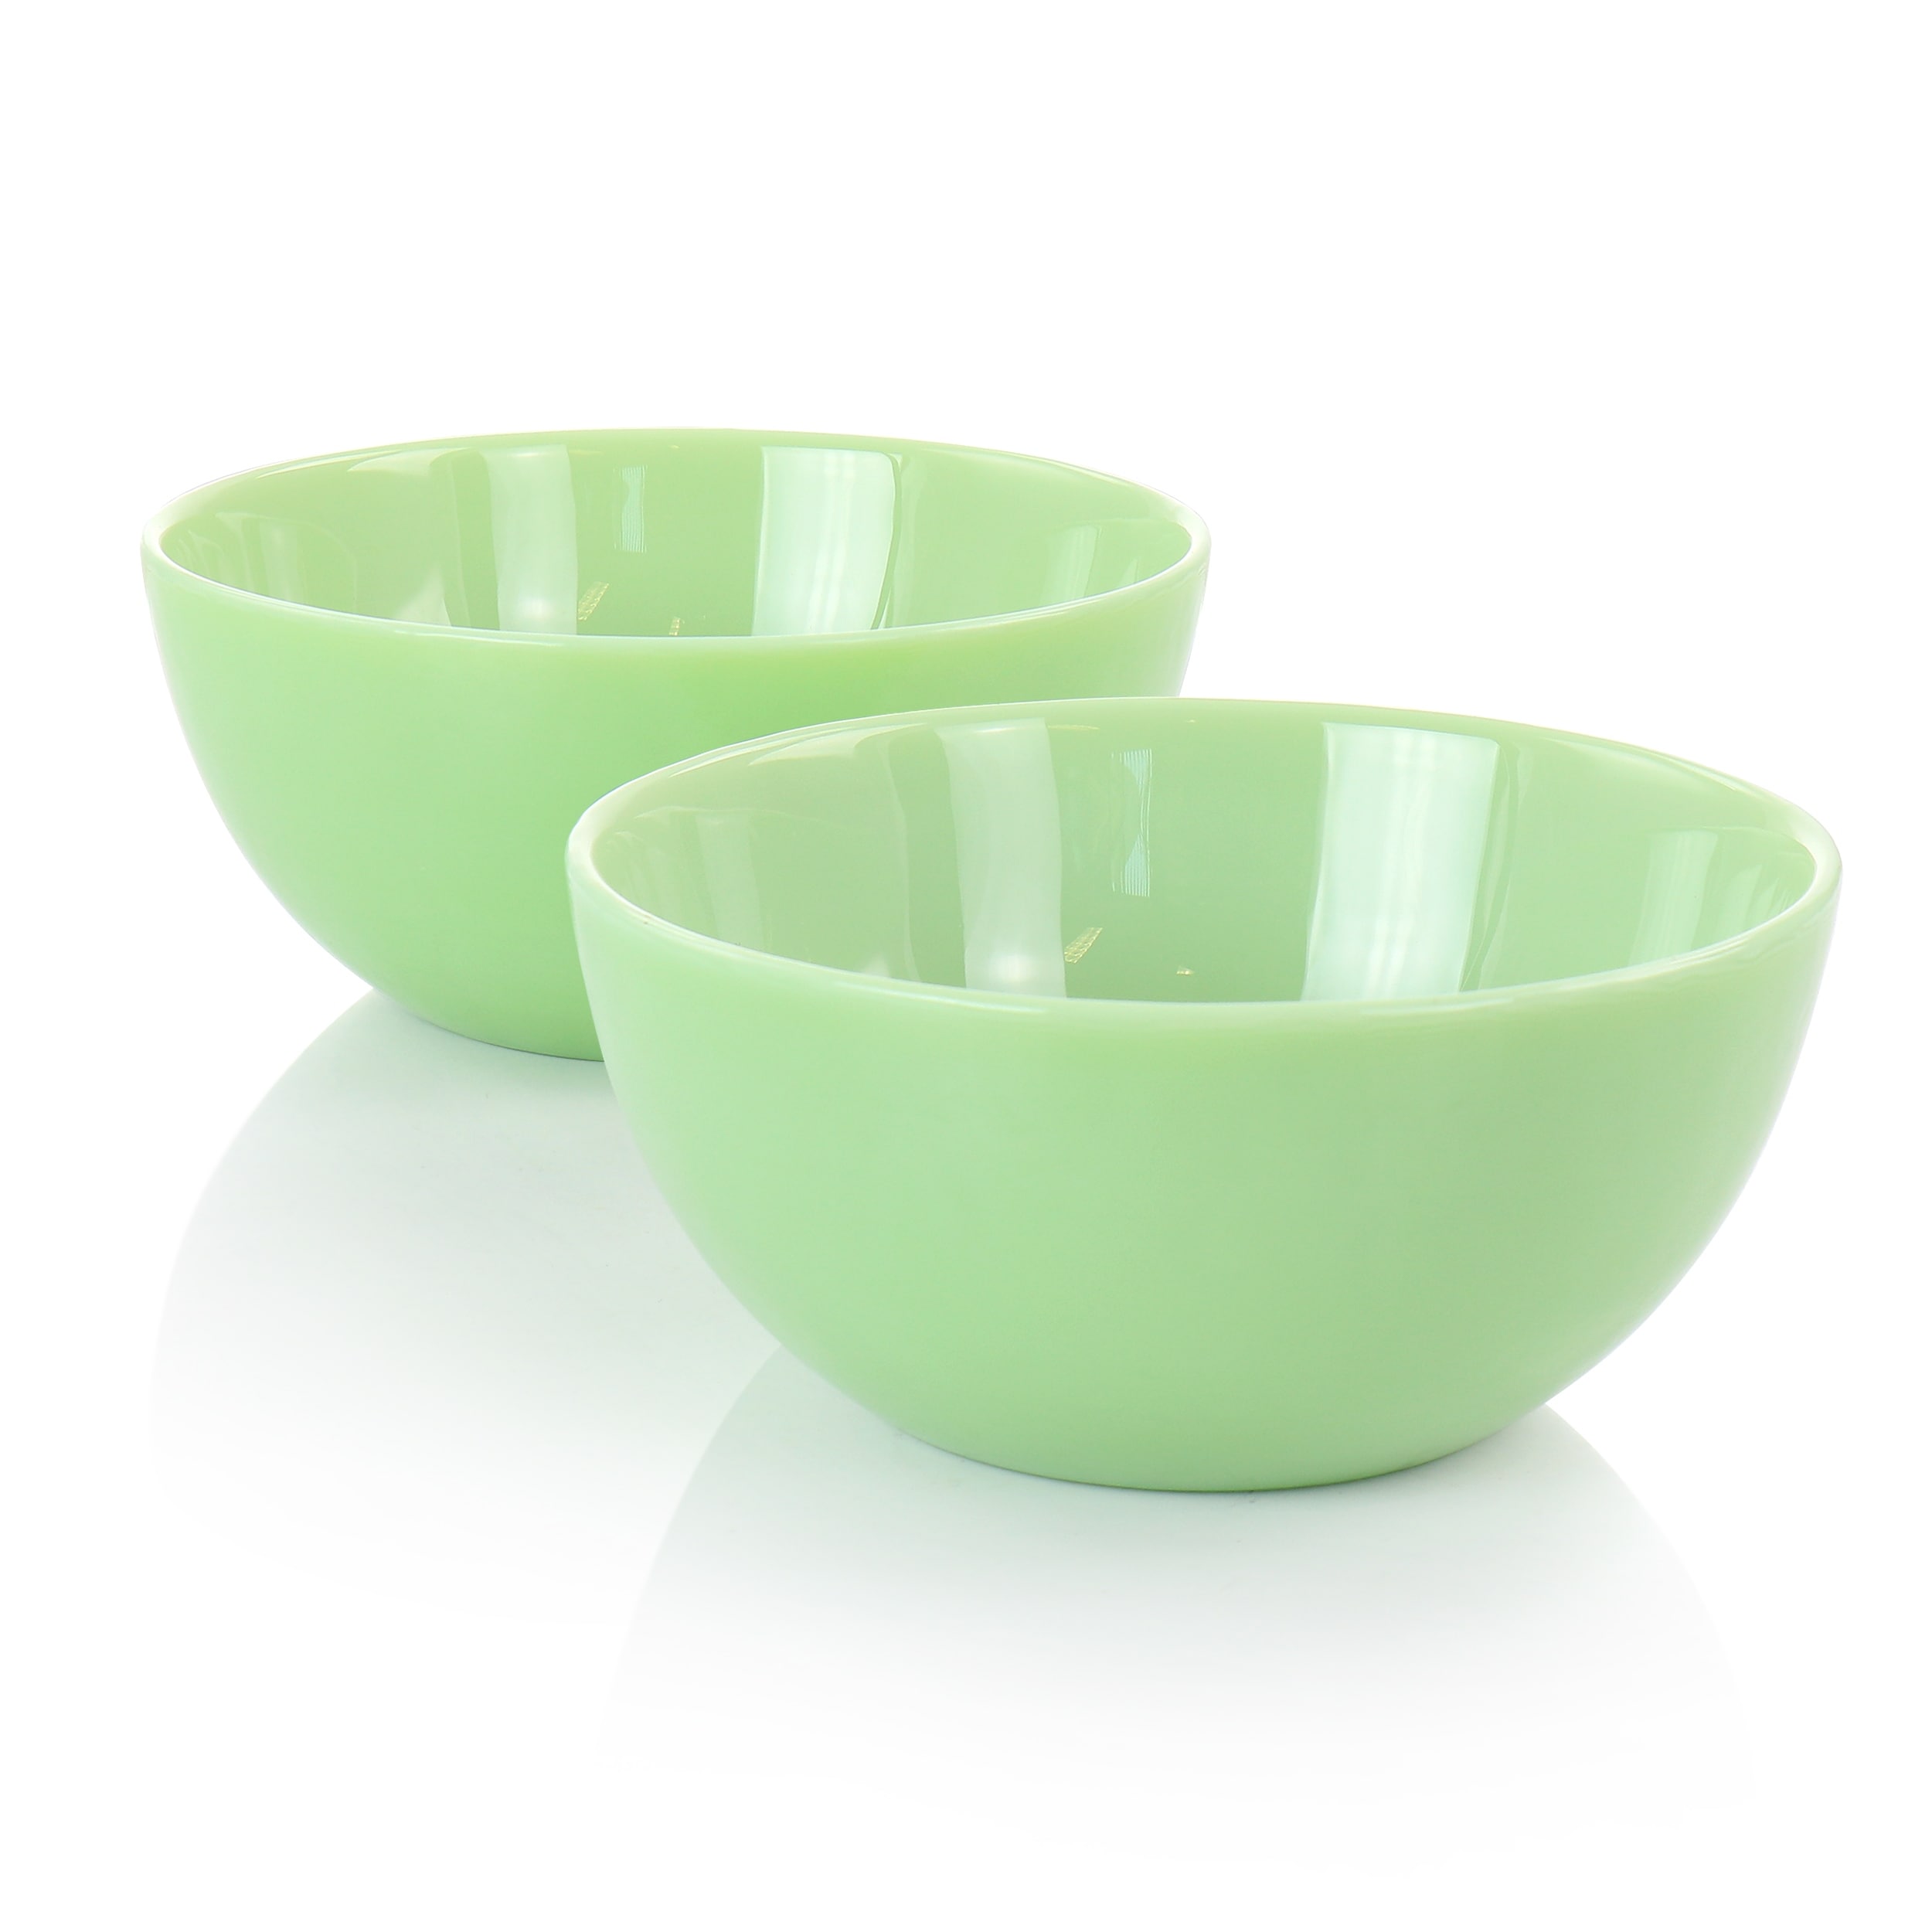 https://ak1.ostkcdn.com/images/products/is/images/direct/fd043e88cb5133a7c884b38e136710cac7643321/Martha-Stewart-2-Piece-6-Inch-Jadeite-Glass-Bowl-Set-in-Jade-Green.jpg